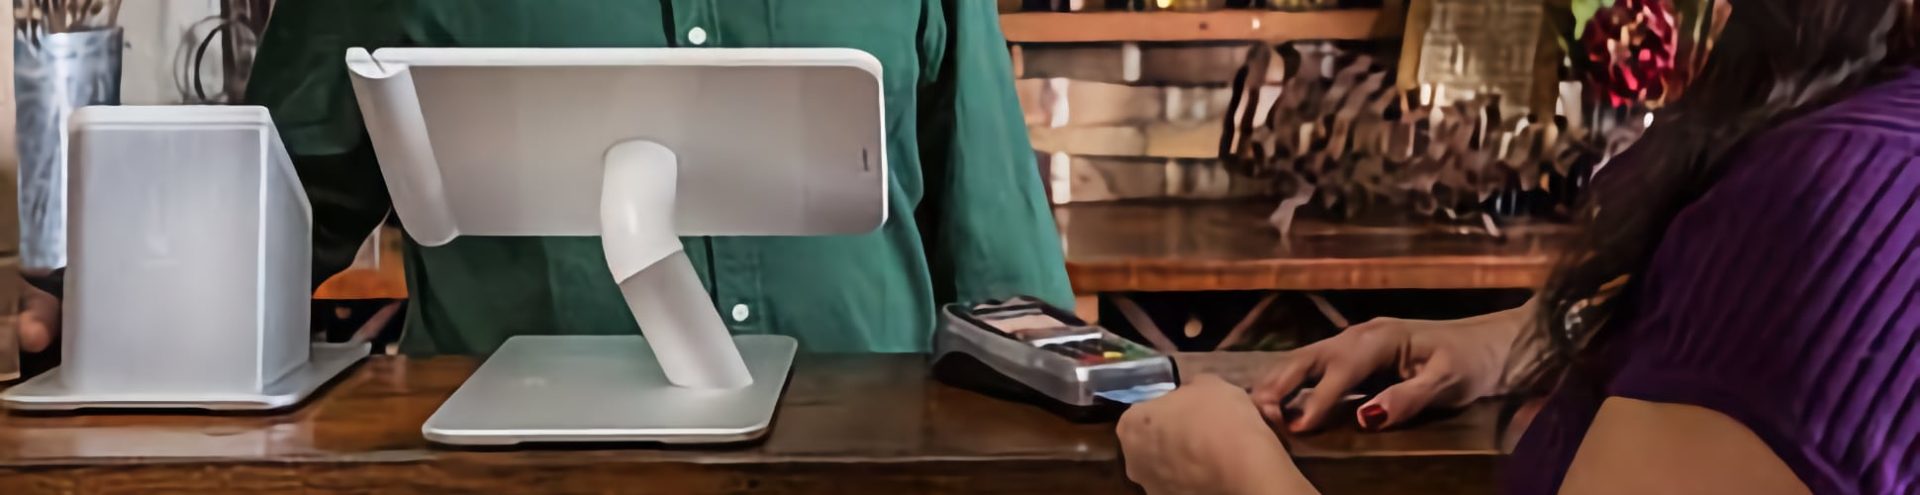 A POS System on a counter